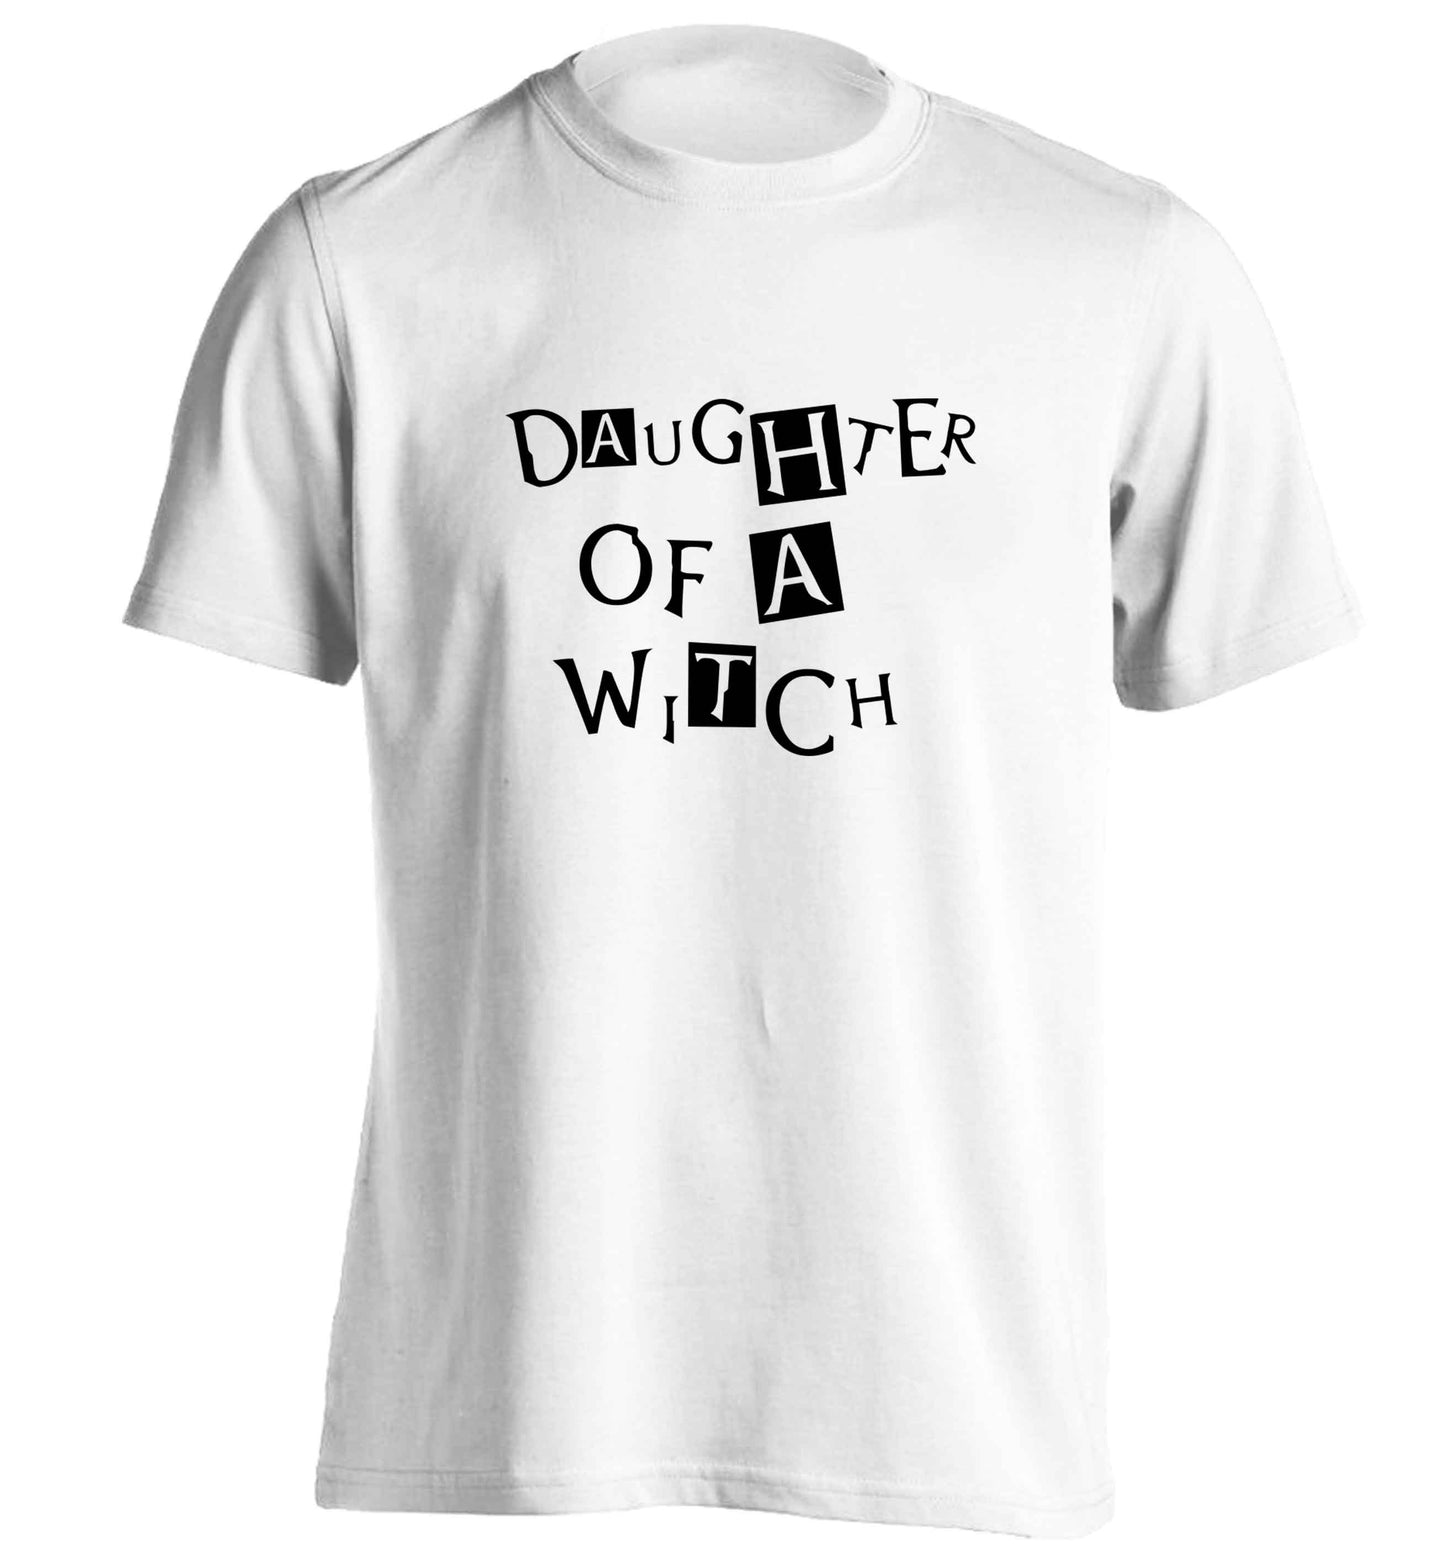 Daughter of a witch adults unisex white Tshirt 2XL